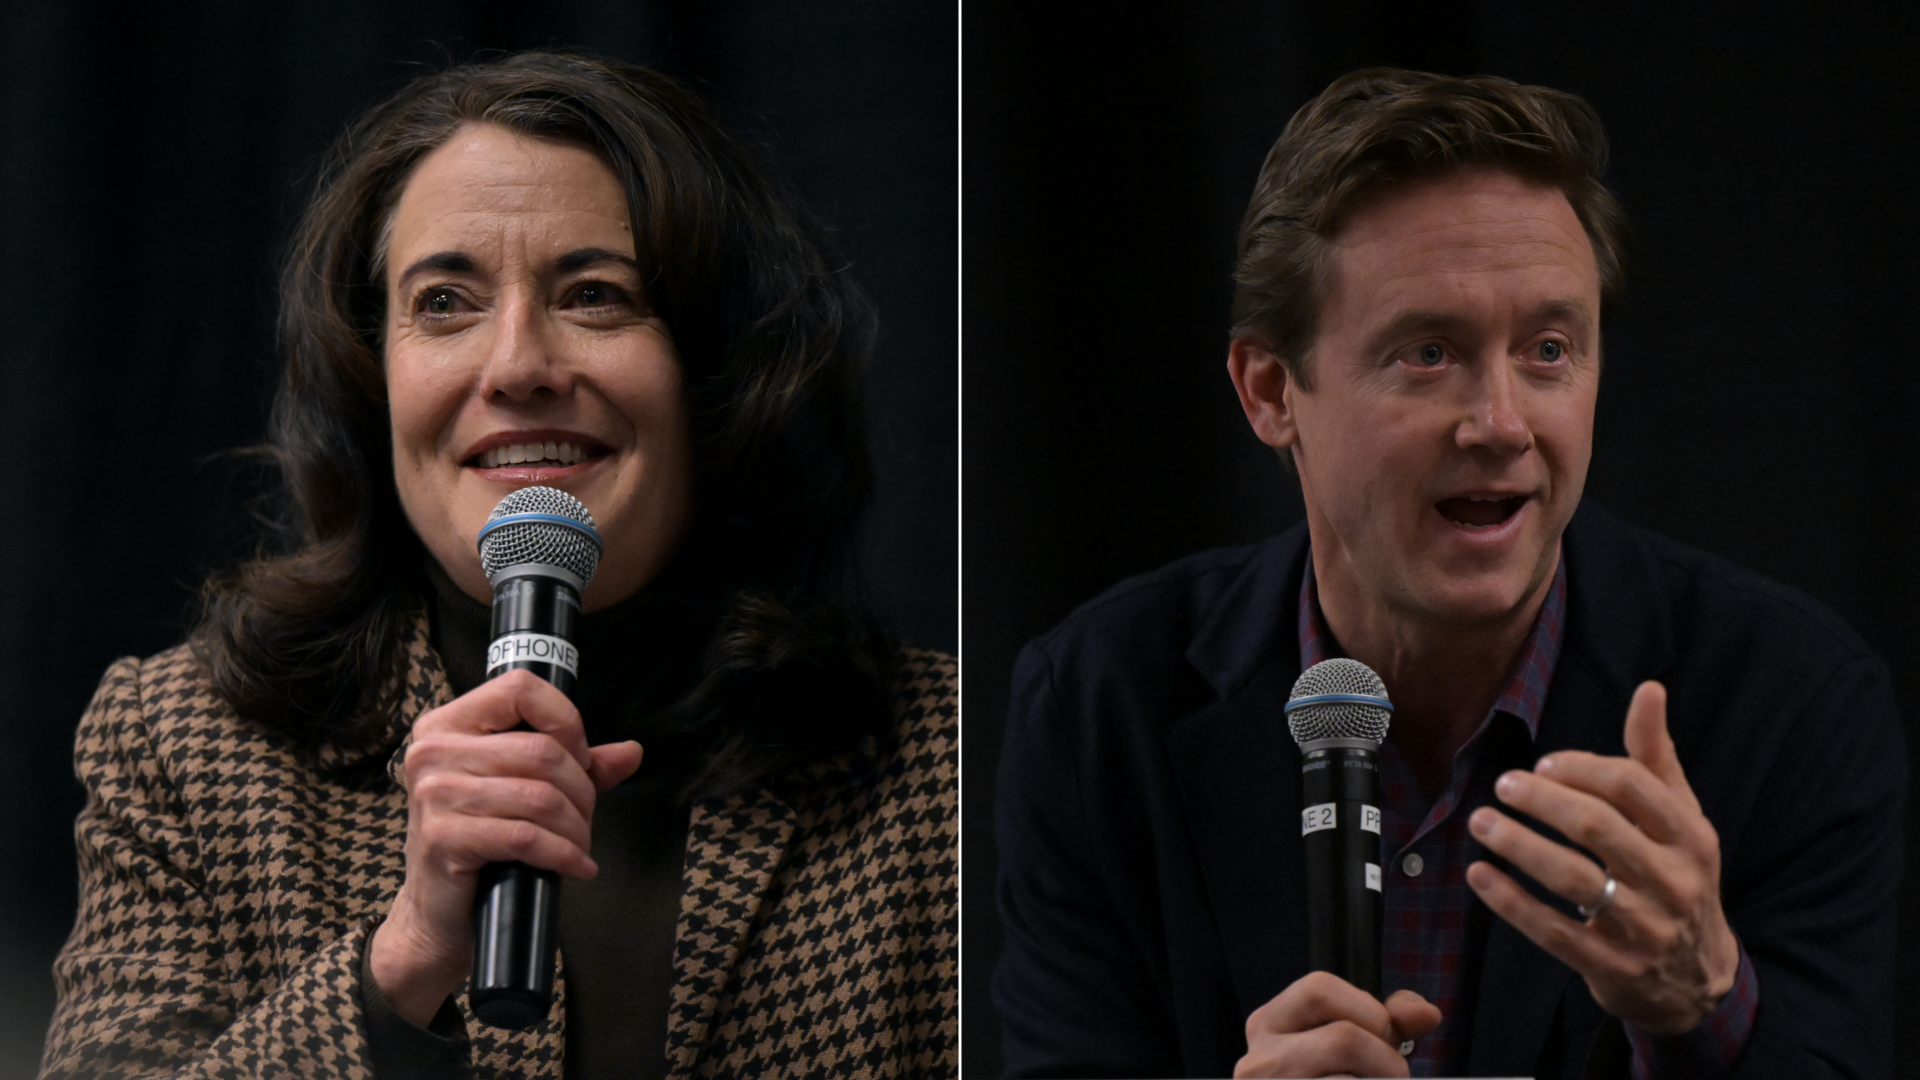 Denver mayoral candidates Kelly Brough, left, and Mike Johnston at a Feb. 23 forum. Photos: Hyoung Chang/Denver Post